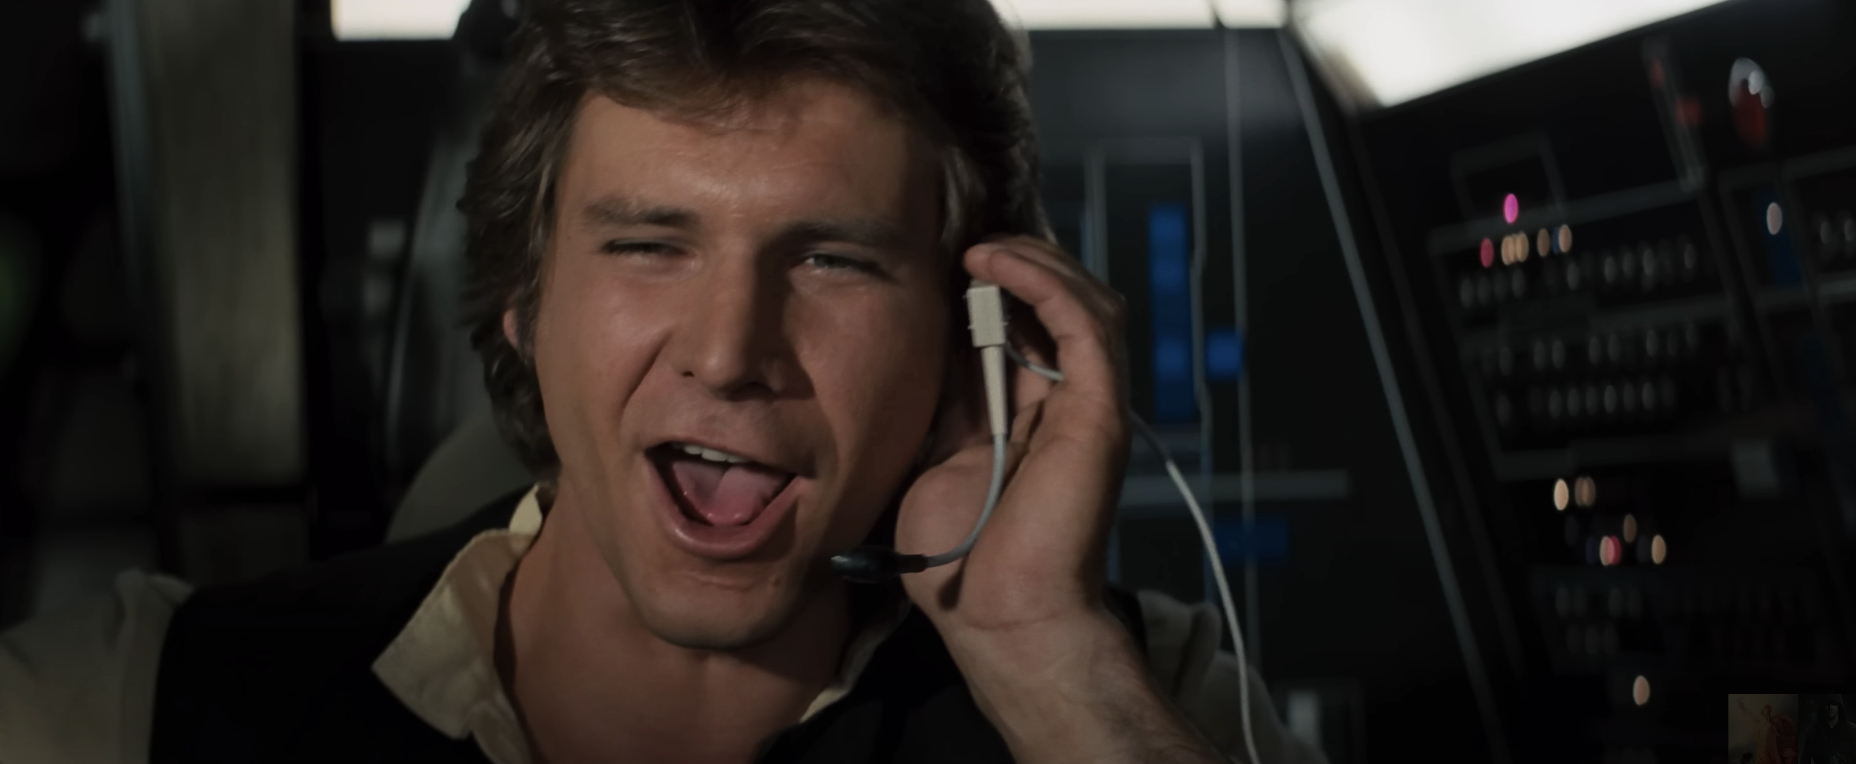 Harrison Ford as Han Solo smiles with a headset in the Millennium Falcon cockpit